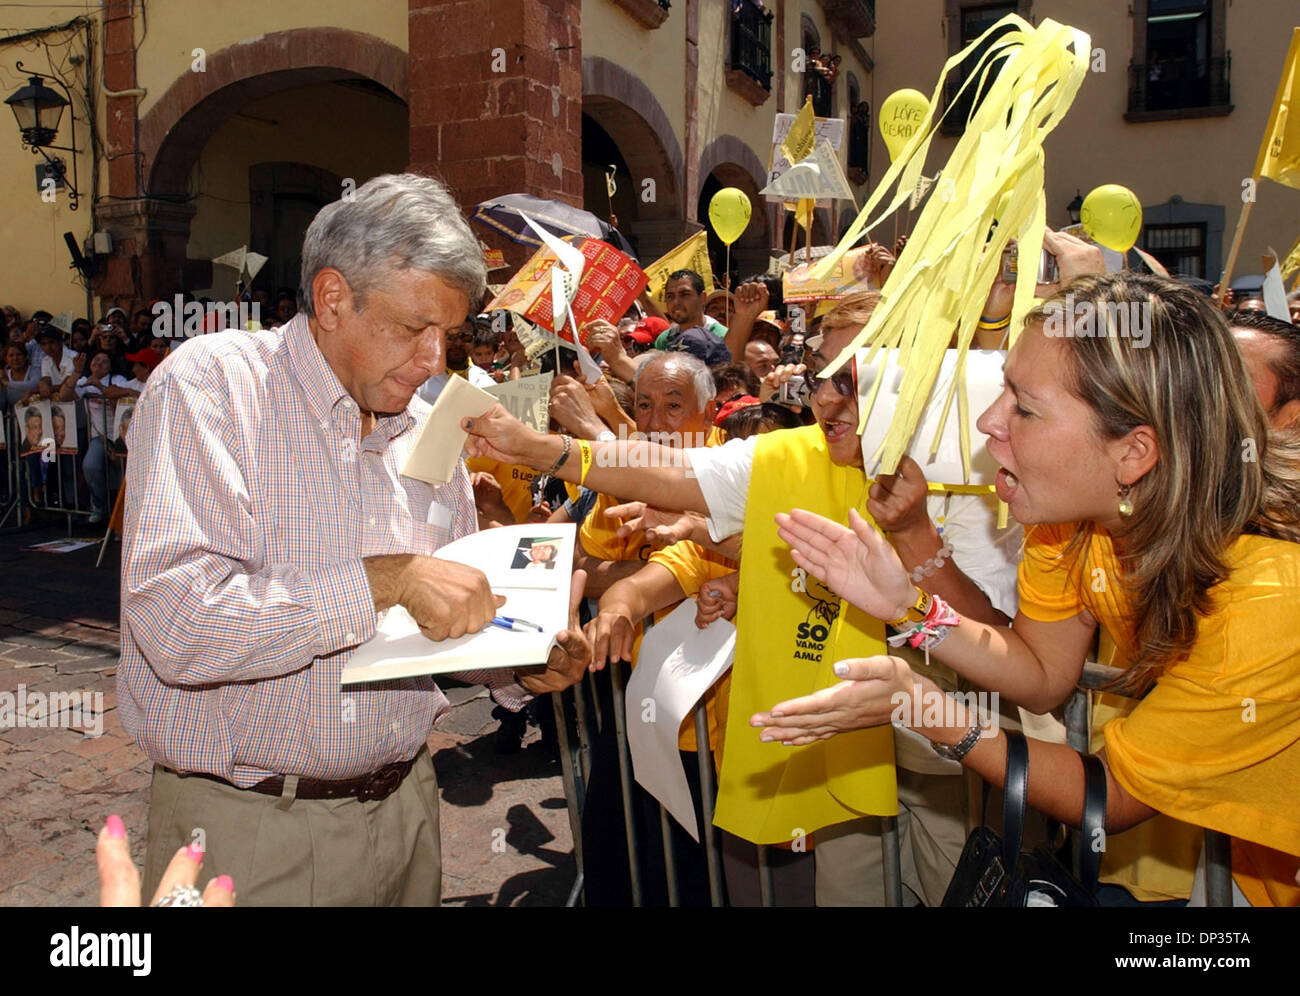 Jun 21, 2006; Queretero, MEXICO;  Democratic Revolution Party candidate Andres Manuel Lopez Obrador gives his autograph to supporters Wednesday June 21, 2006 during a campigan stop in Queretero, Mexico.  Mandatory Credit: Photo by Edward A. Ornelas/San Antonio Express-News/ZUMA Press. (©) Copyright 2006 by San Antonio Express-News Stock Photo